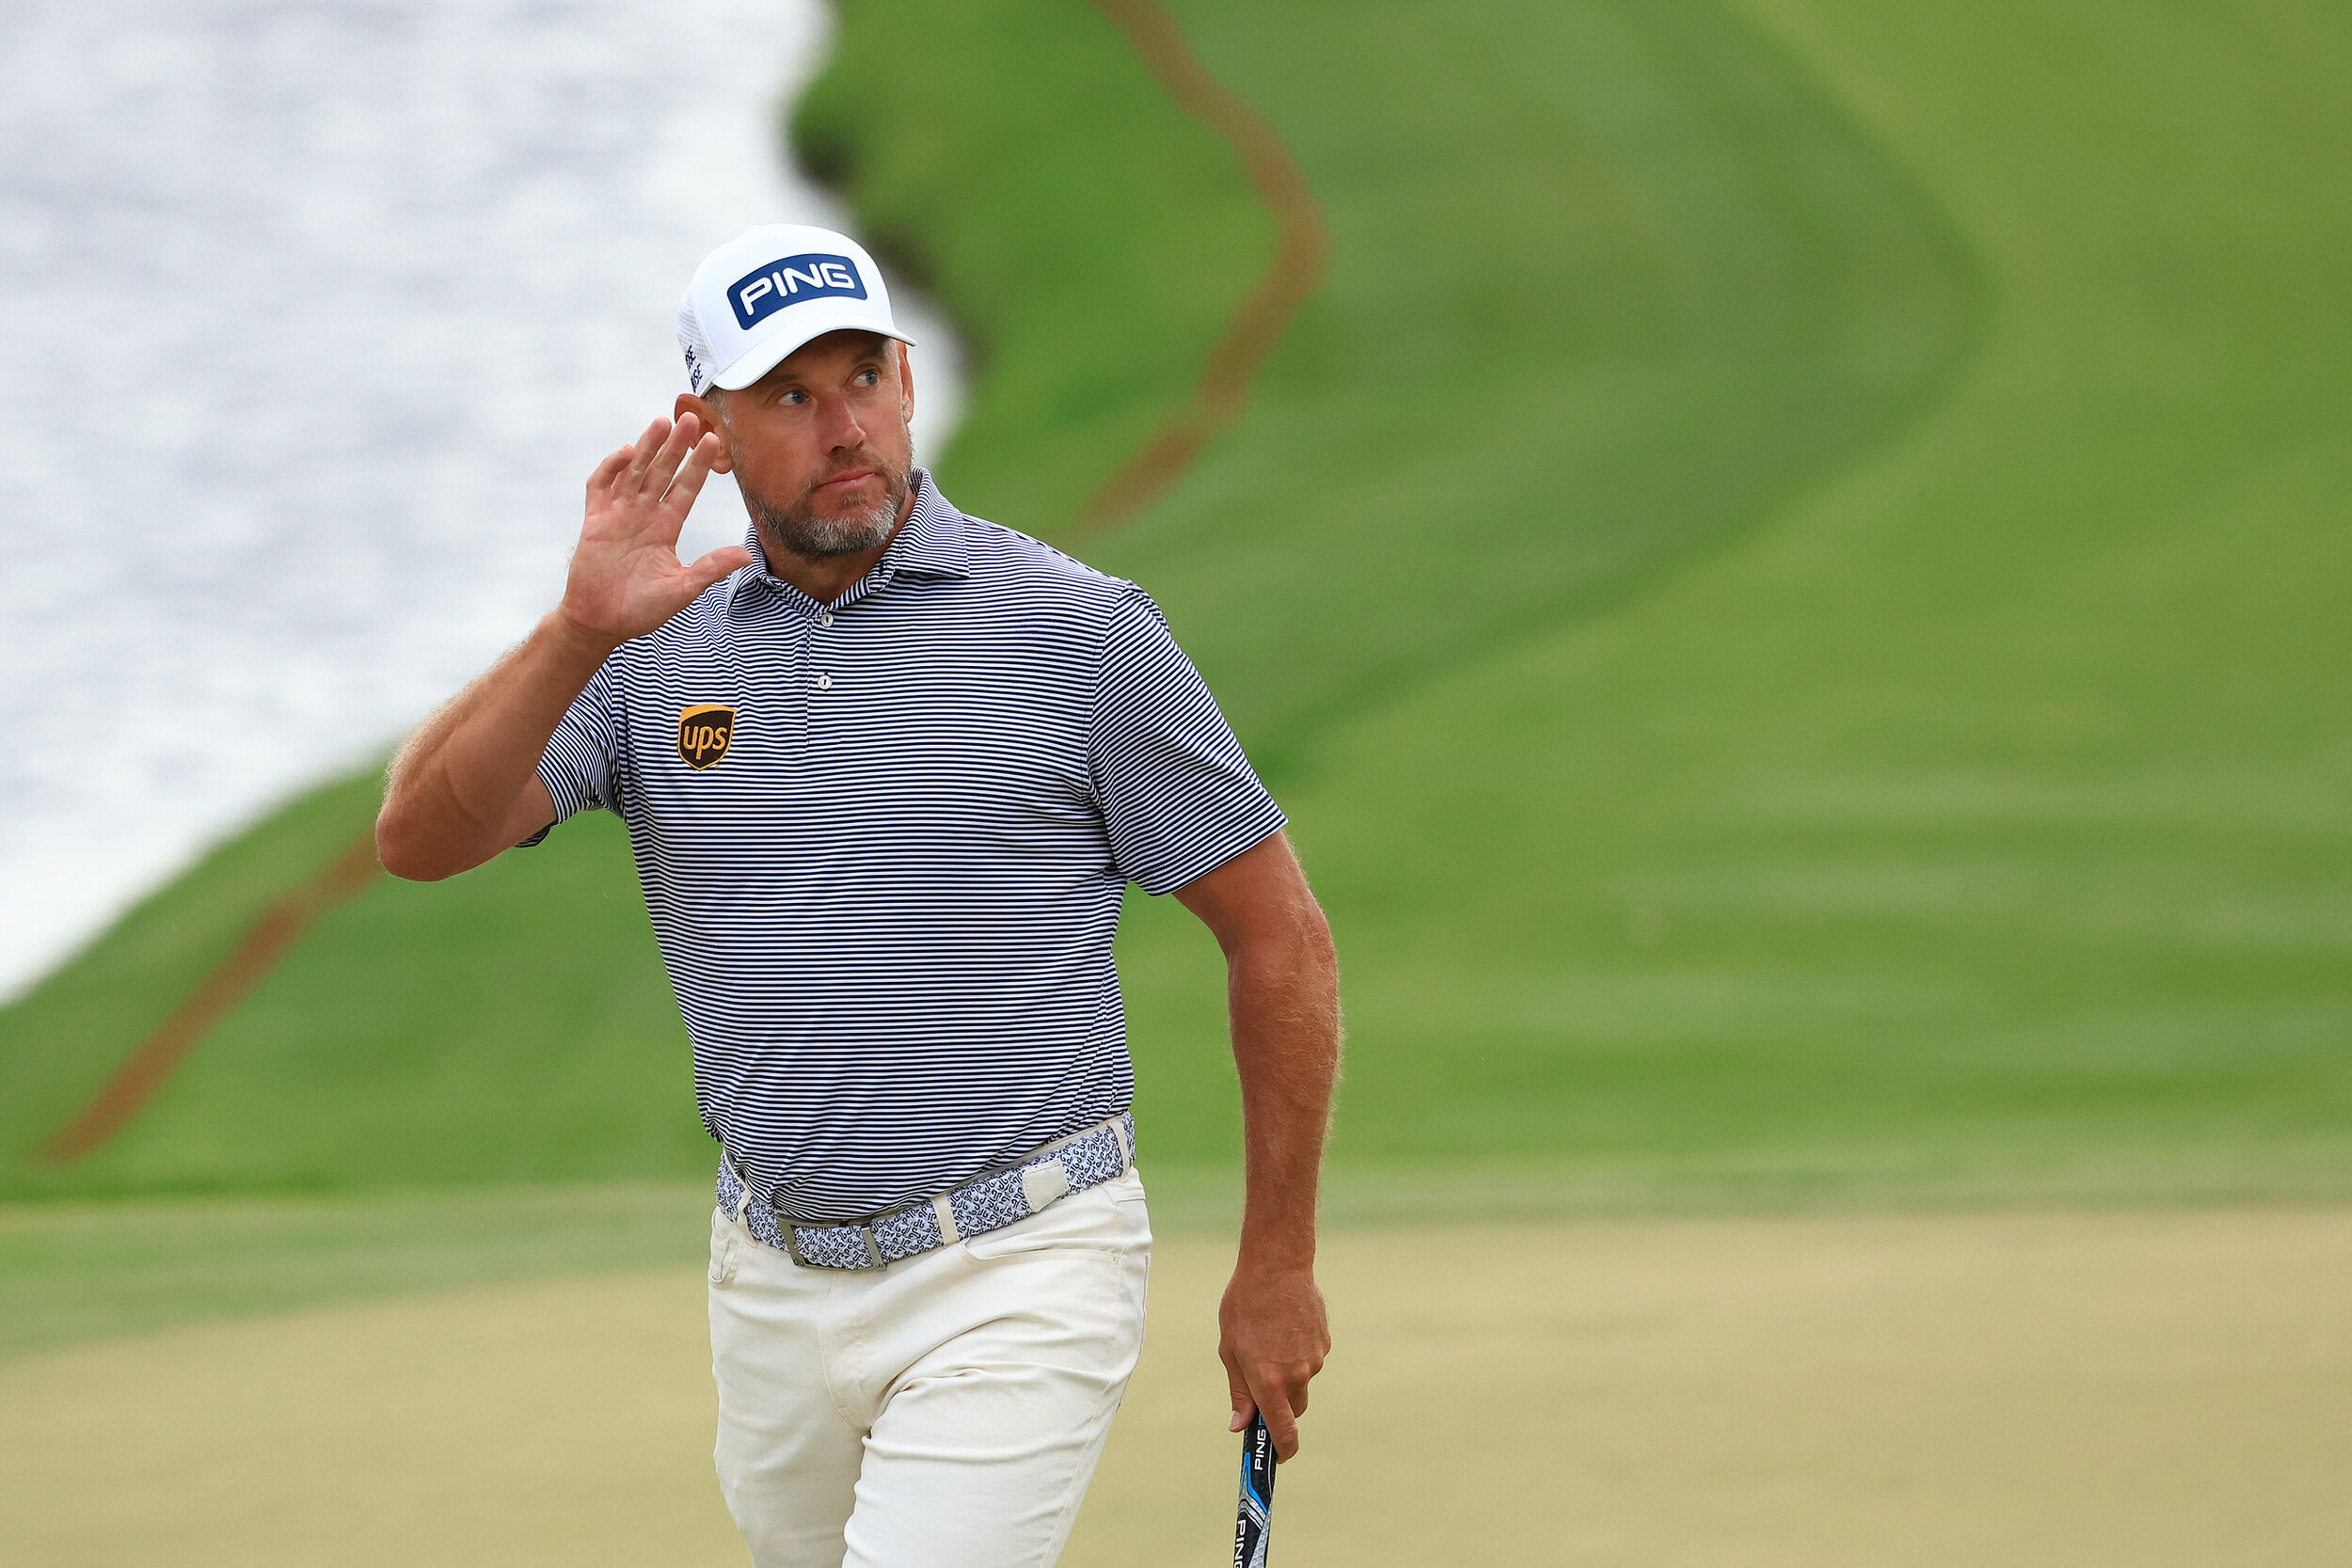  ORLANDO, FLORIDA - MARCH 06: Lee Westwood of England reacts after making a putt for birdie on the 18th green during the third round of the Arnold Palmer Invitational Presented by MasterCard at the Bay Hill Club and Lodge on March 06, 2021 in Orlando